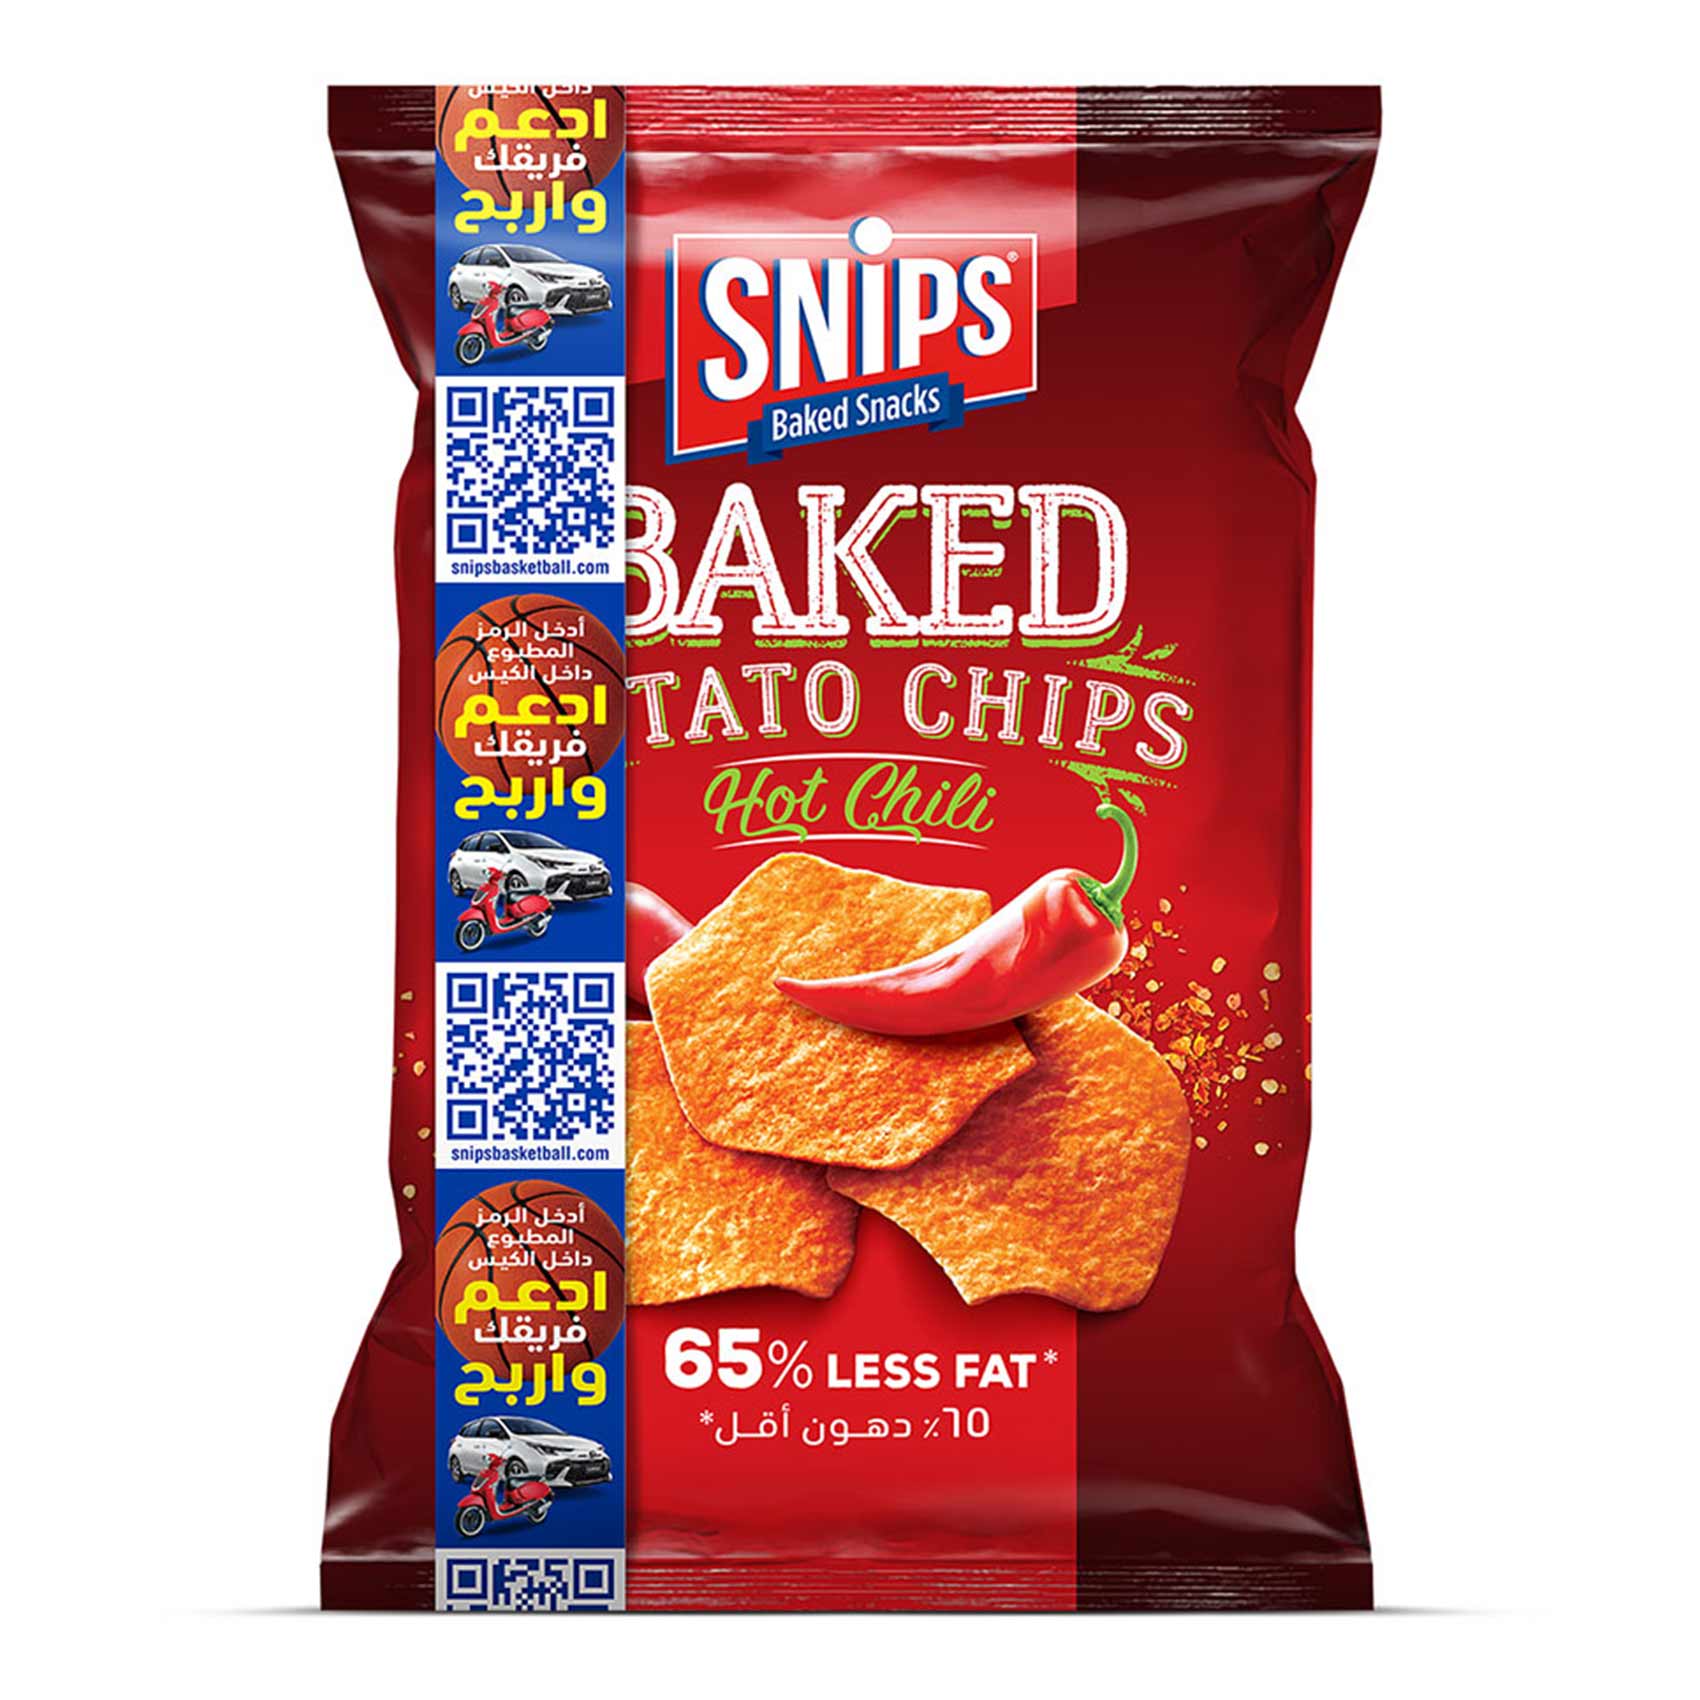 LAY'S® Baked BBQ Flavored Potato Crisps